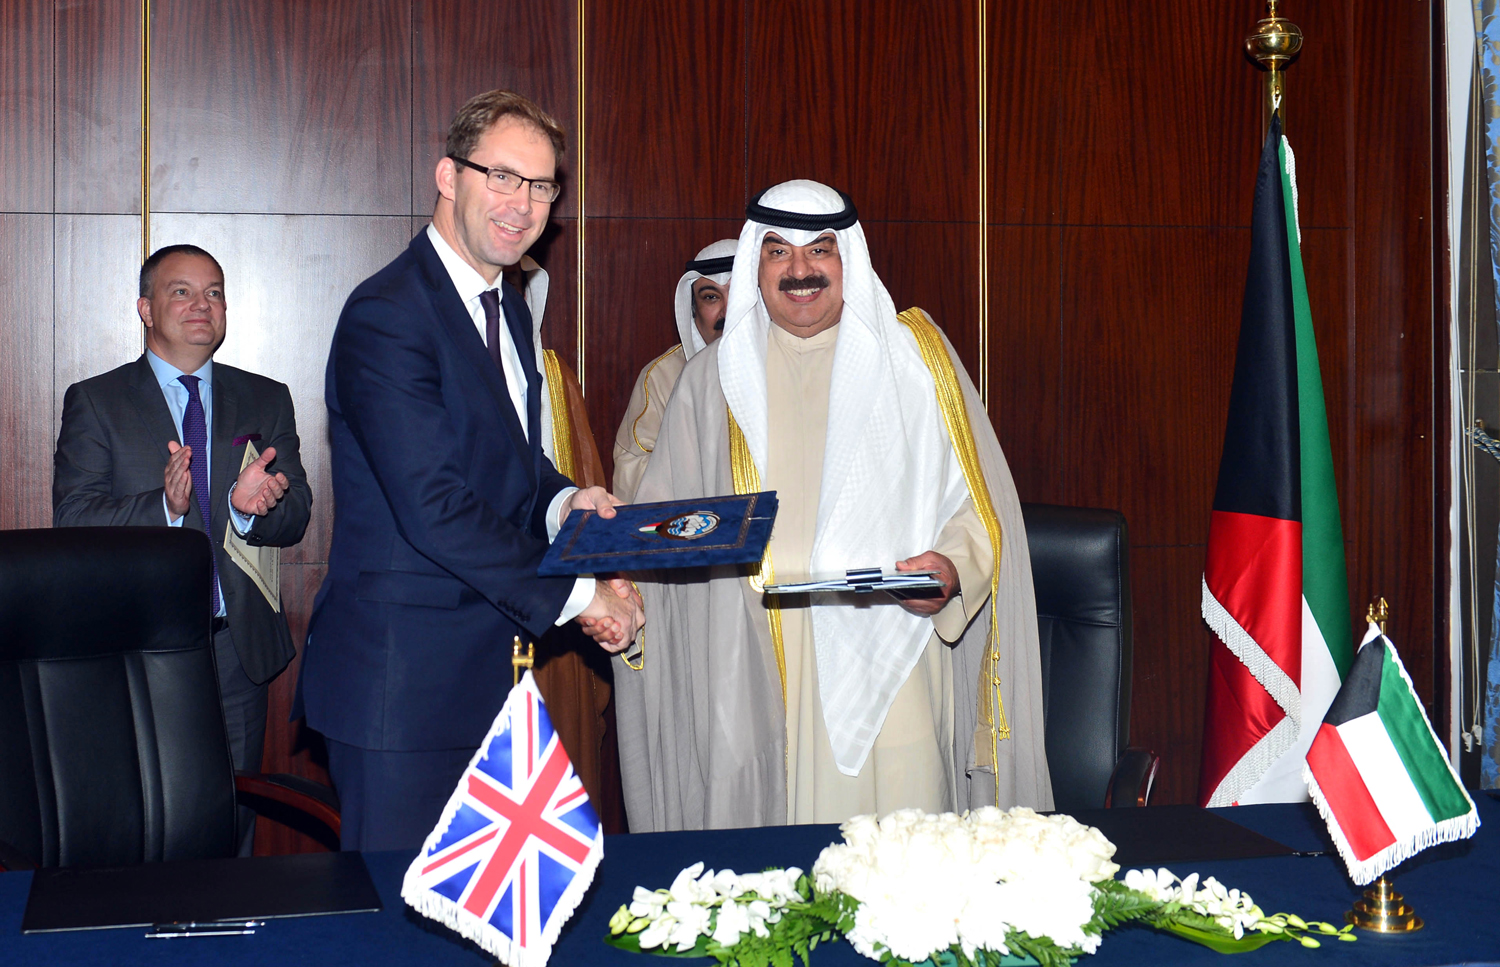 chairmanship of Deputy Foreign Minister Khaled Al-Jarallah and Under Secretary of State at the Foreign Office for the Middle East and North Africa Tobias Ellwood during signs